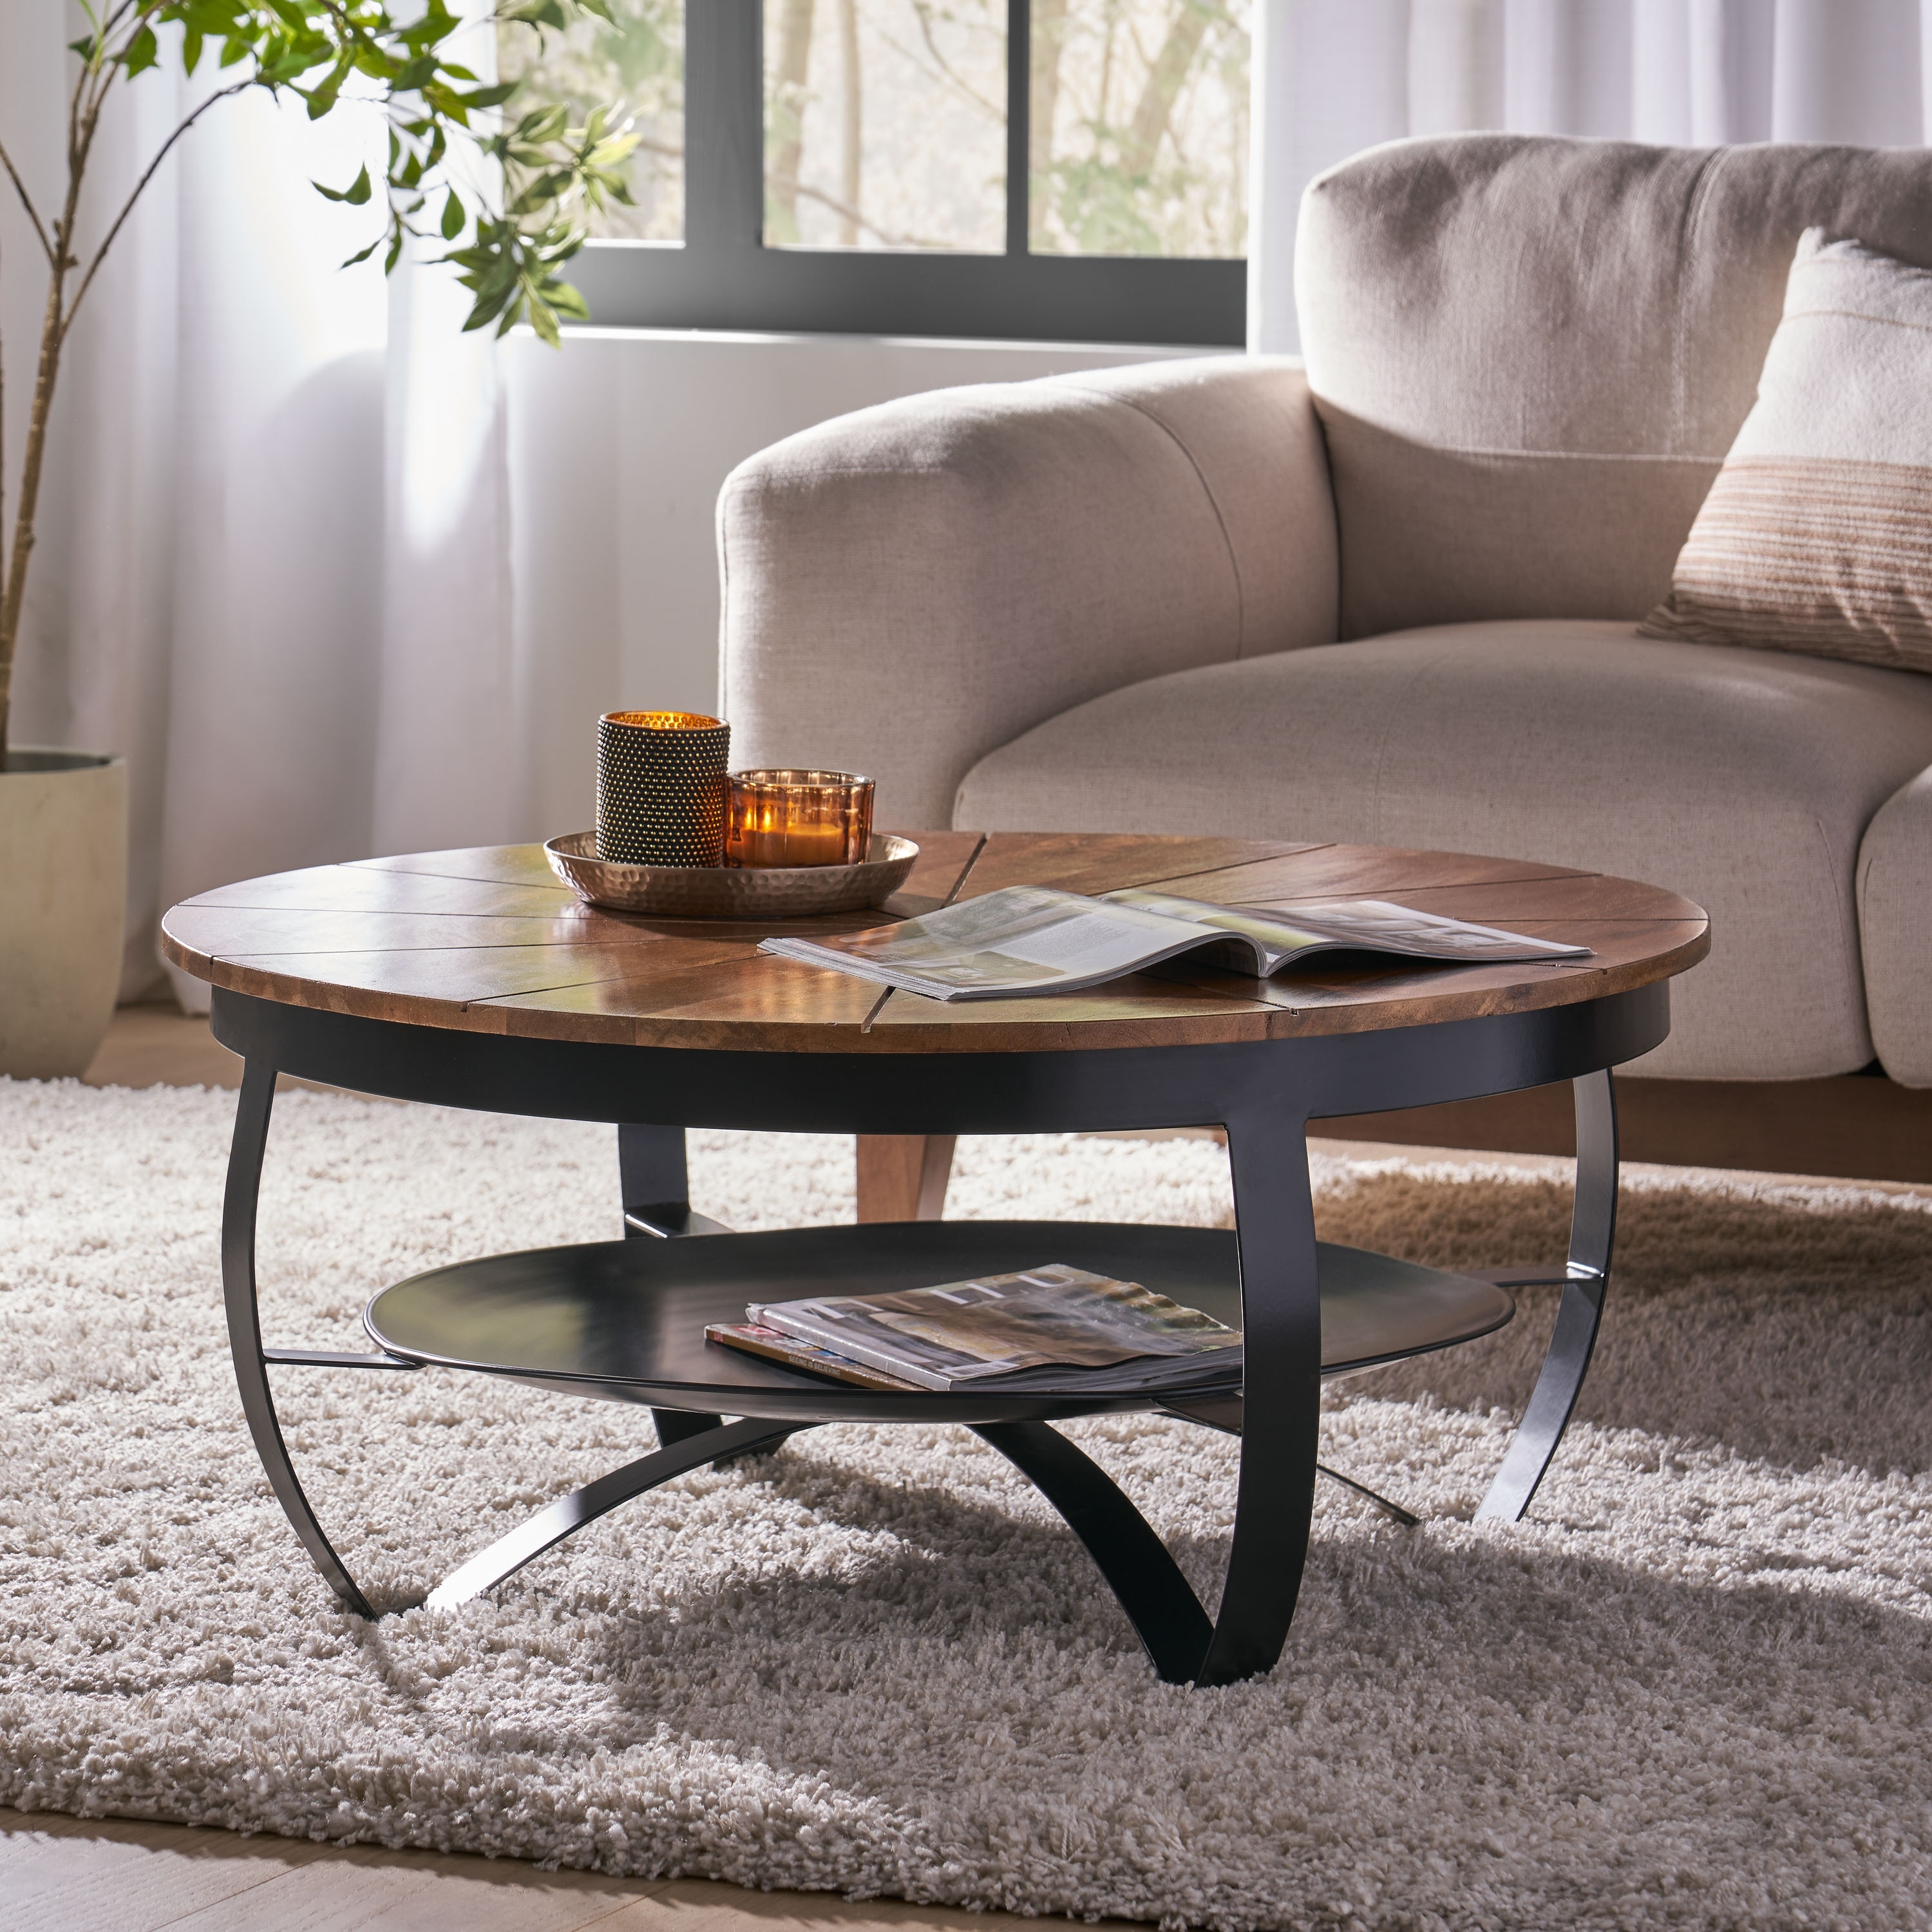 https://ak1.ostkcdn.com/images/products/is/images/direct/f1c21daf8edf819fc4db6b1e6a675731aac139e7/Hadfield-Boho-Mango-Coffee-Table-by-Christopher-Knight-Home.jpg